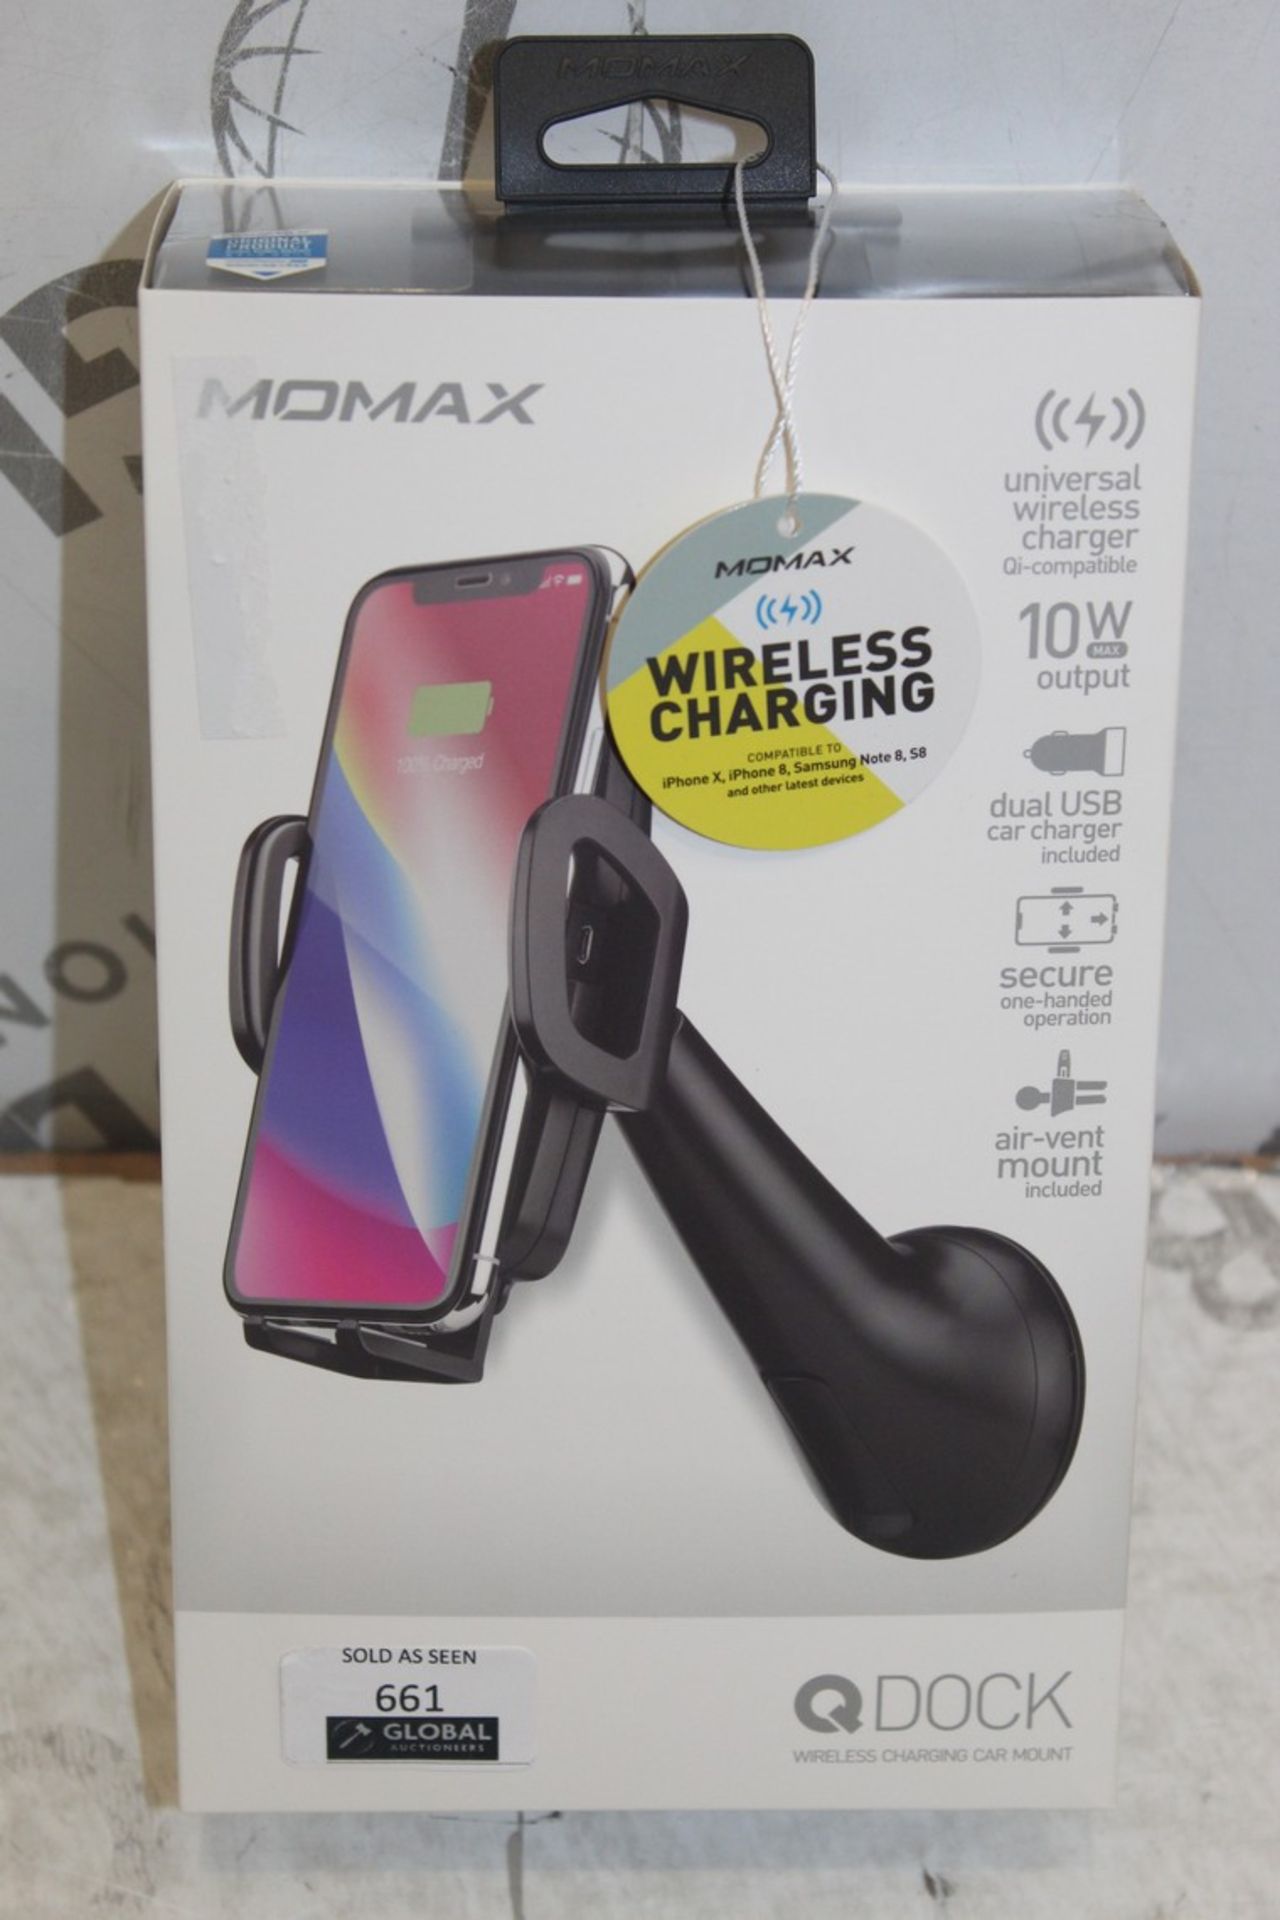 Momax wireless Charging Car Mount RRP £50 (Appraisals Are Available Upon Request)(Pictures Are For